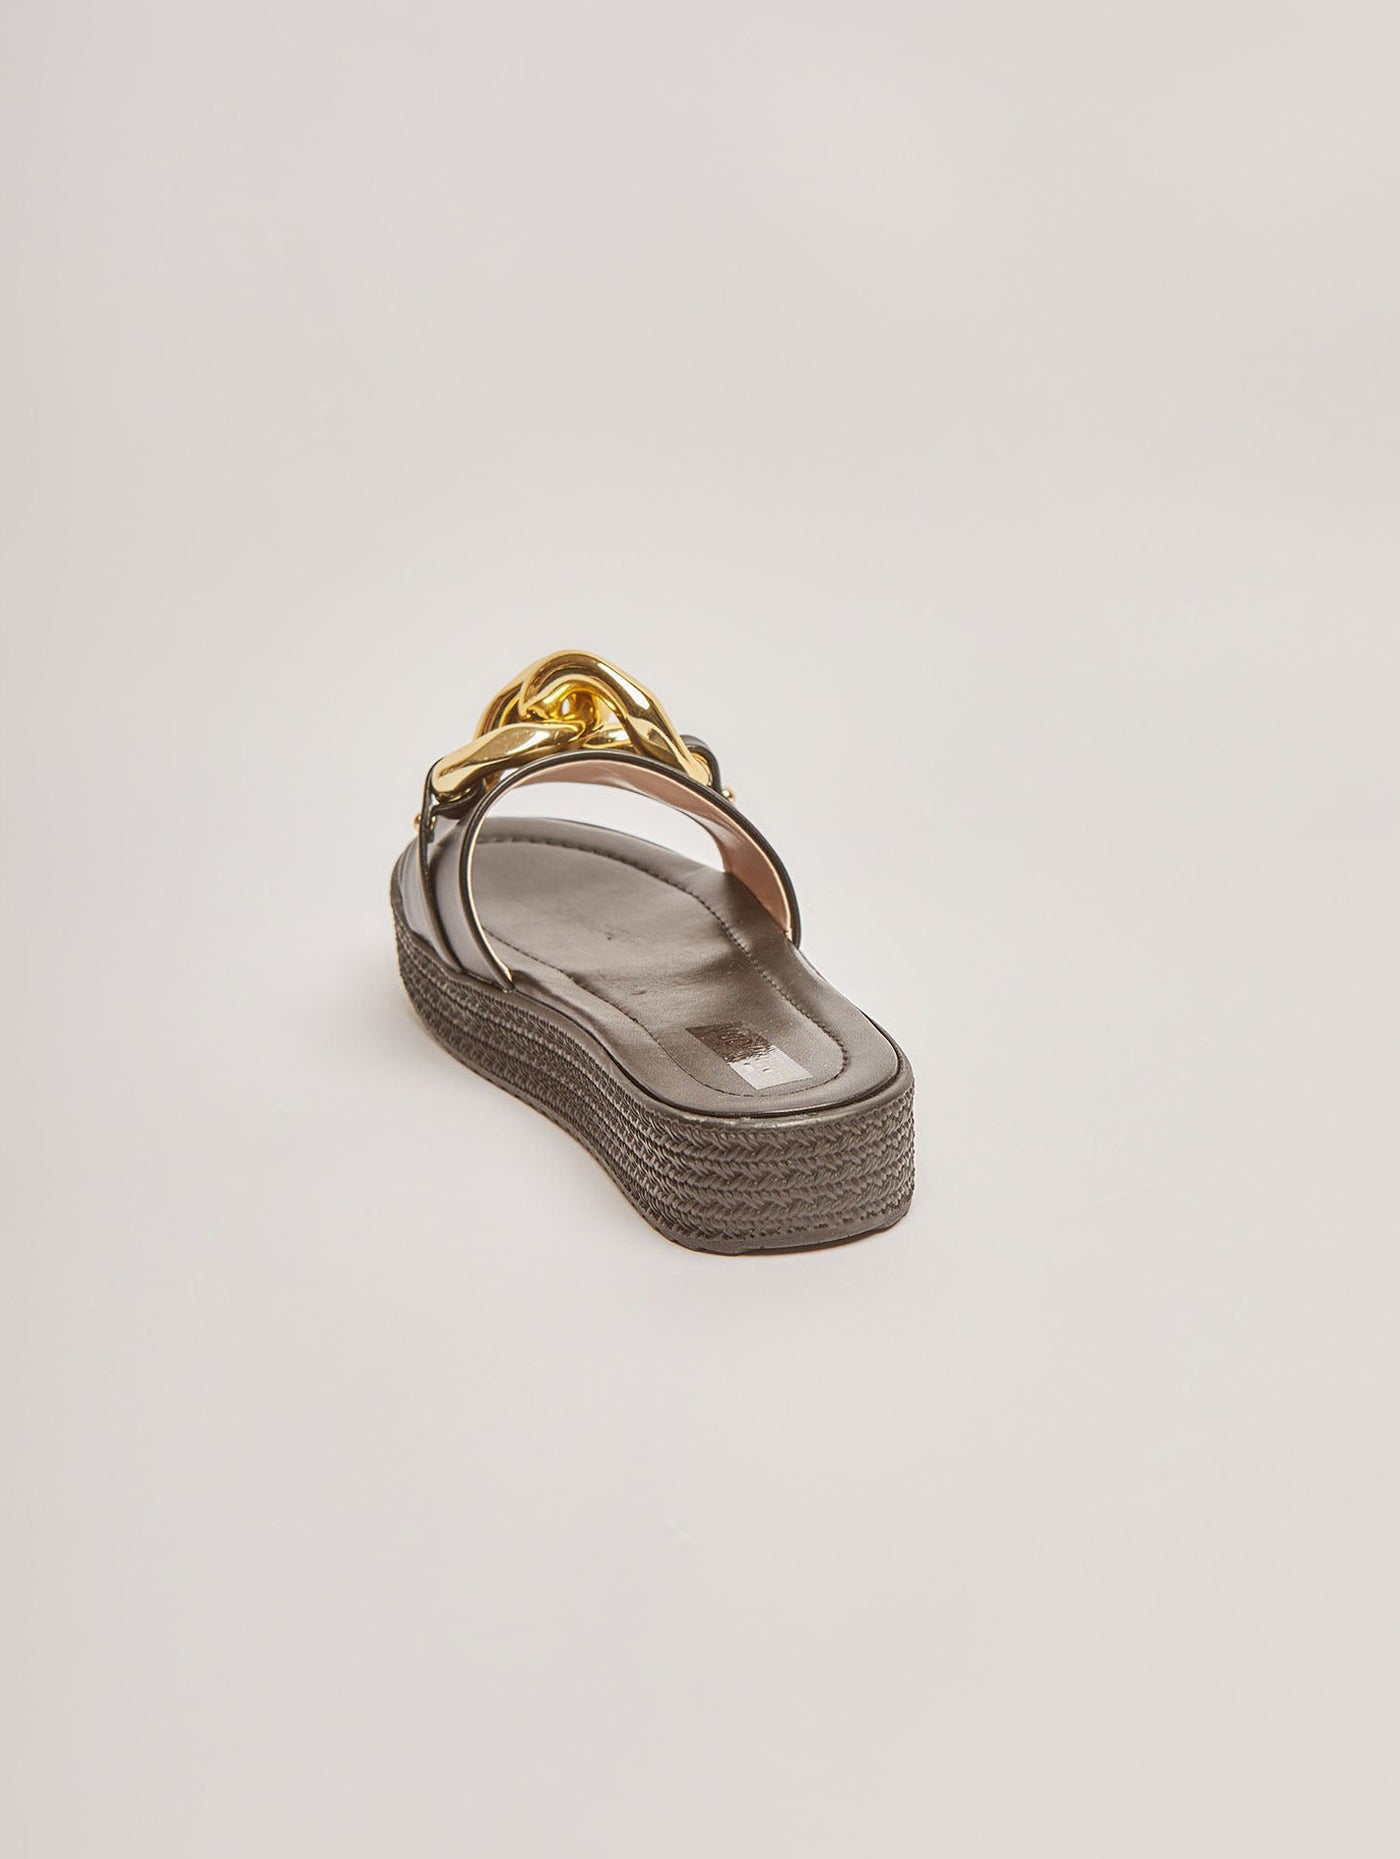 Slippers - Open Toe - Front Chain